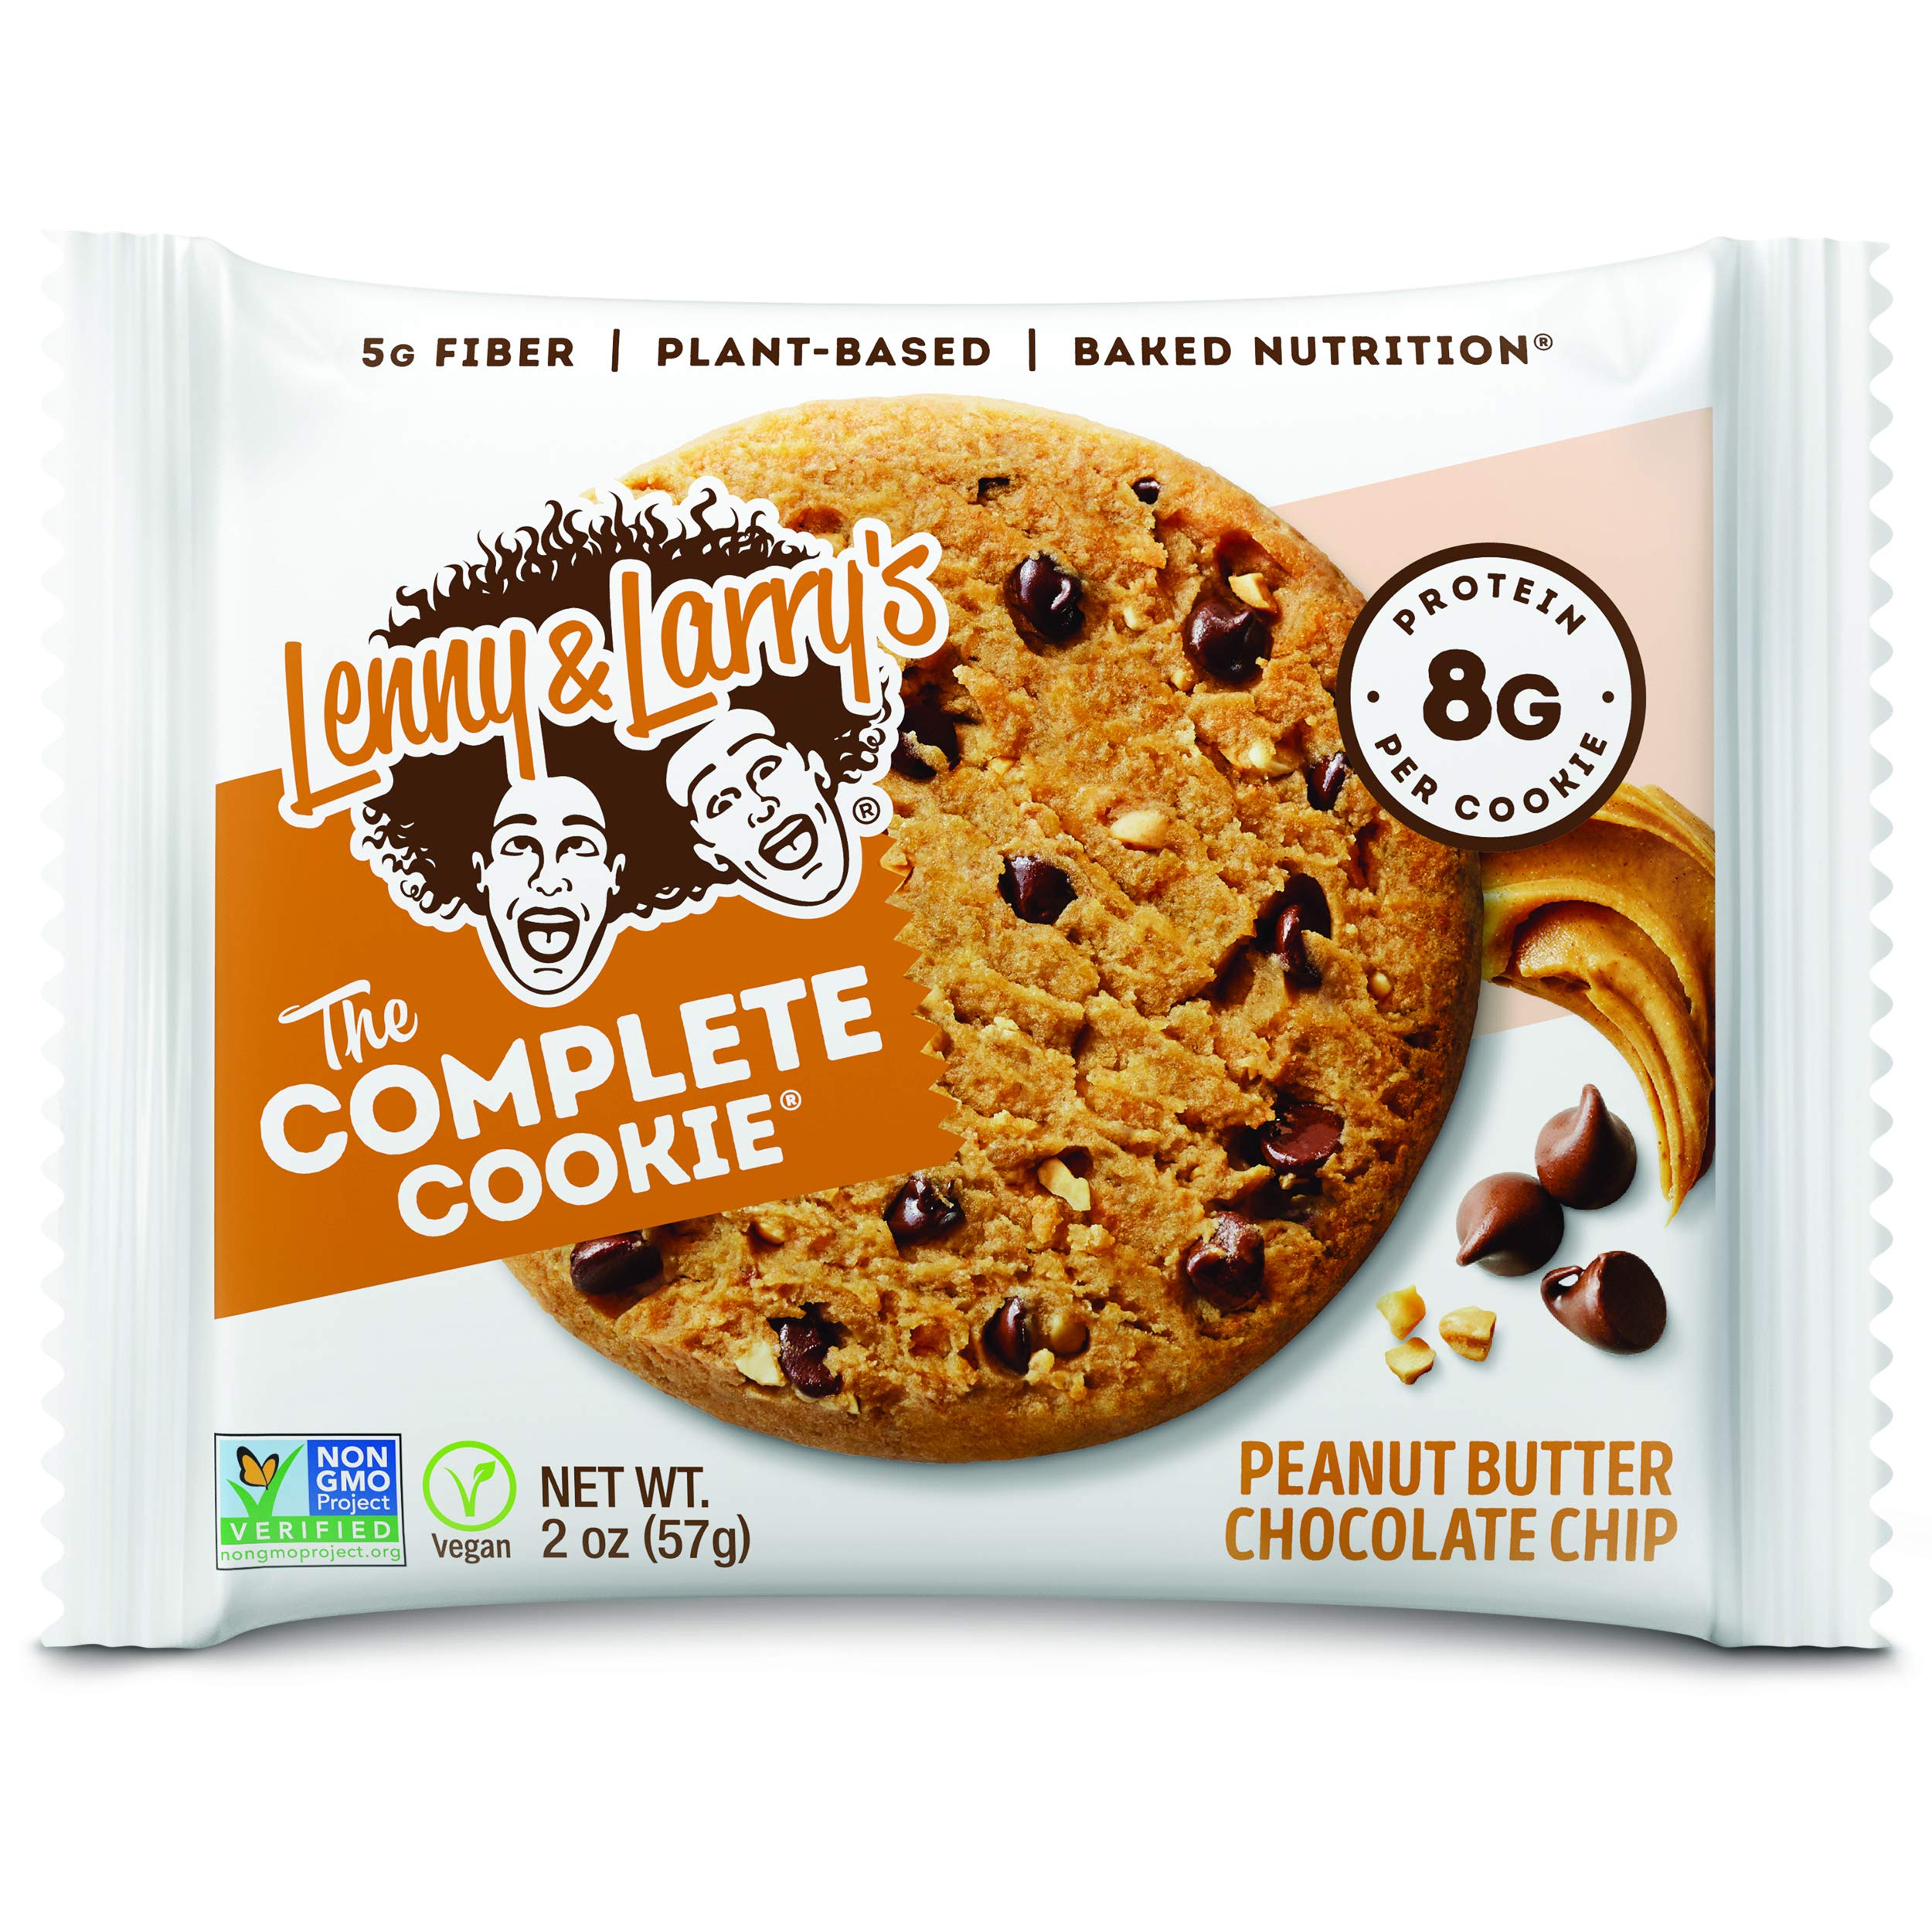 12 pack Lenny & Larry's The Complete Cookie, Peanut Butter Chocolate Chip, $10.98 (or lower if coupon available) with S&S, Amazon